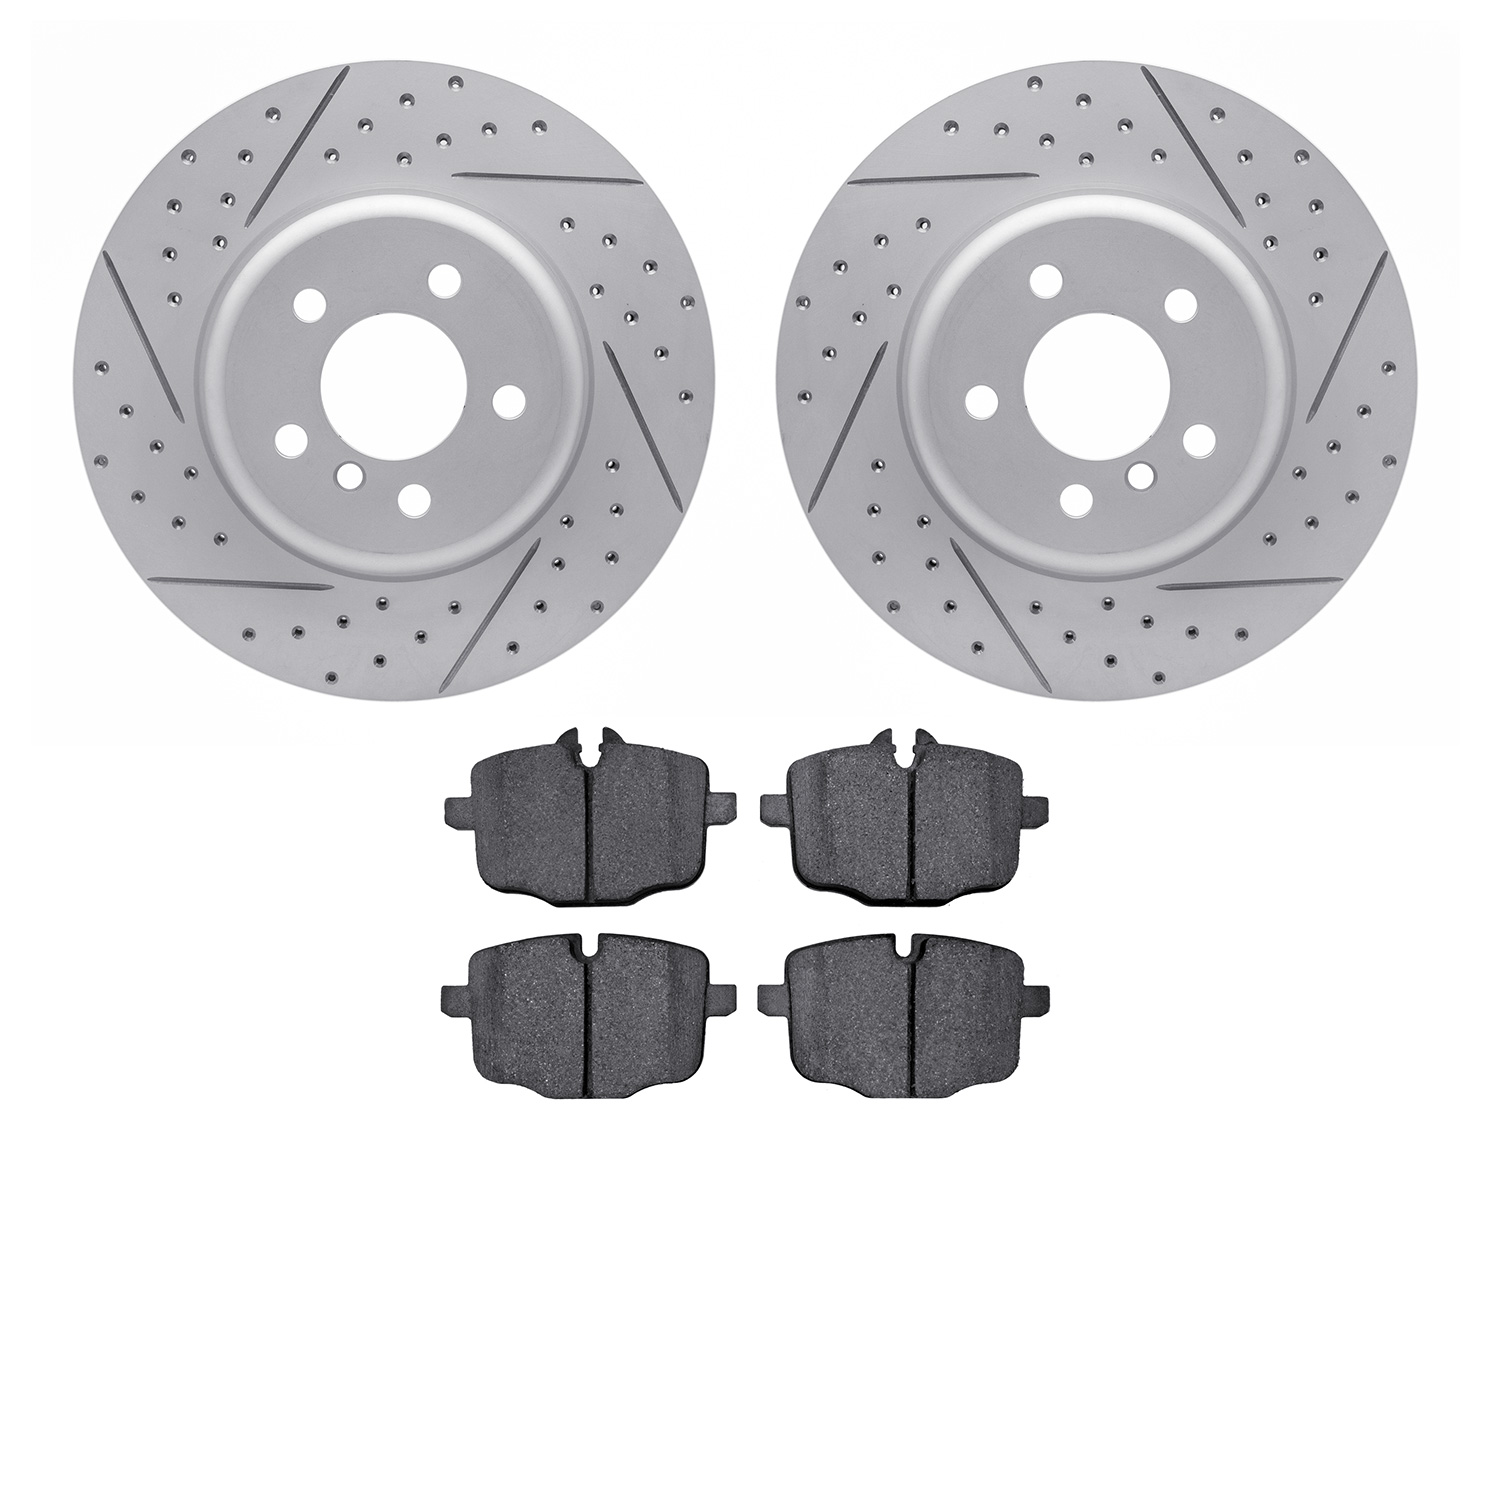 2502-31085 Geoperformance Drilled/Slotted Rotors w/5000 Advanced Brake Pads Kit, 2015-2015 BMW, Position: Rear